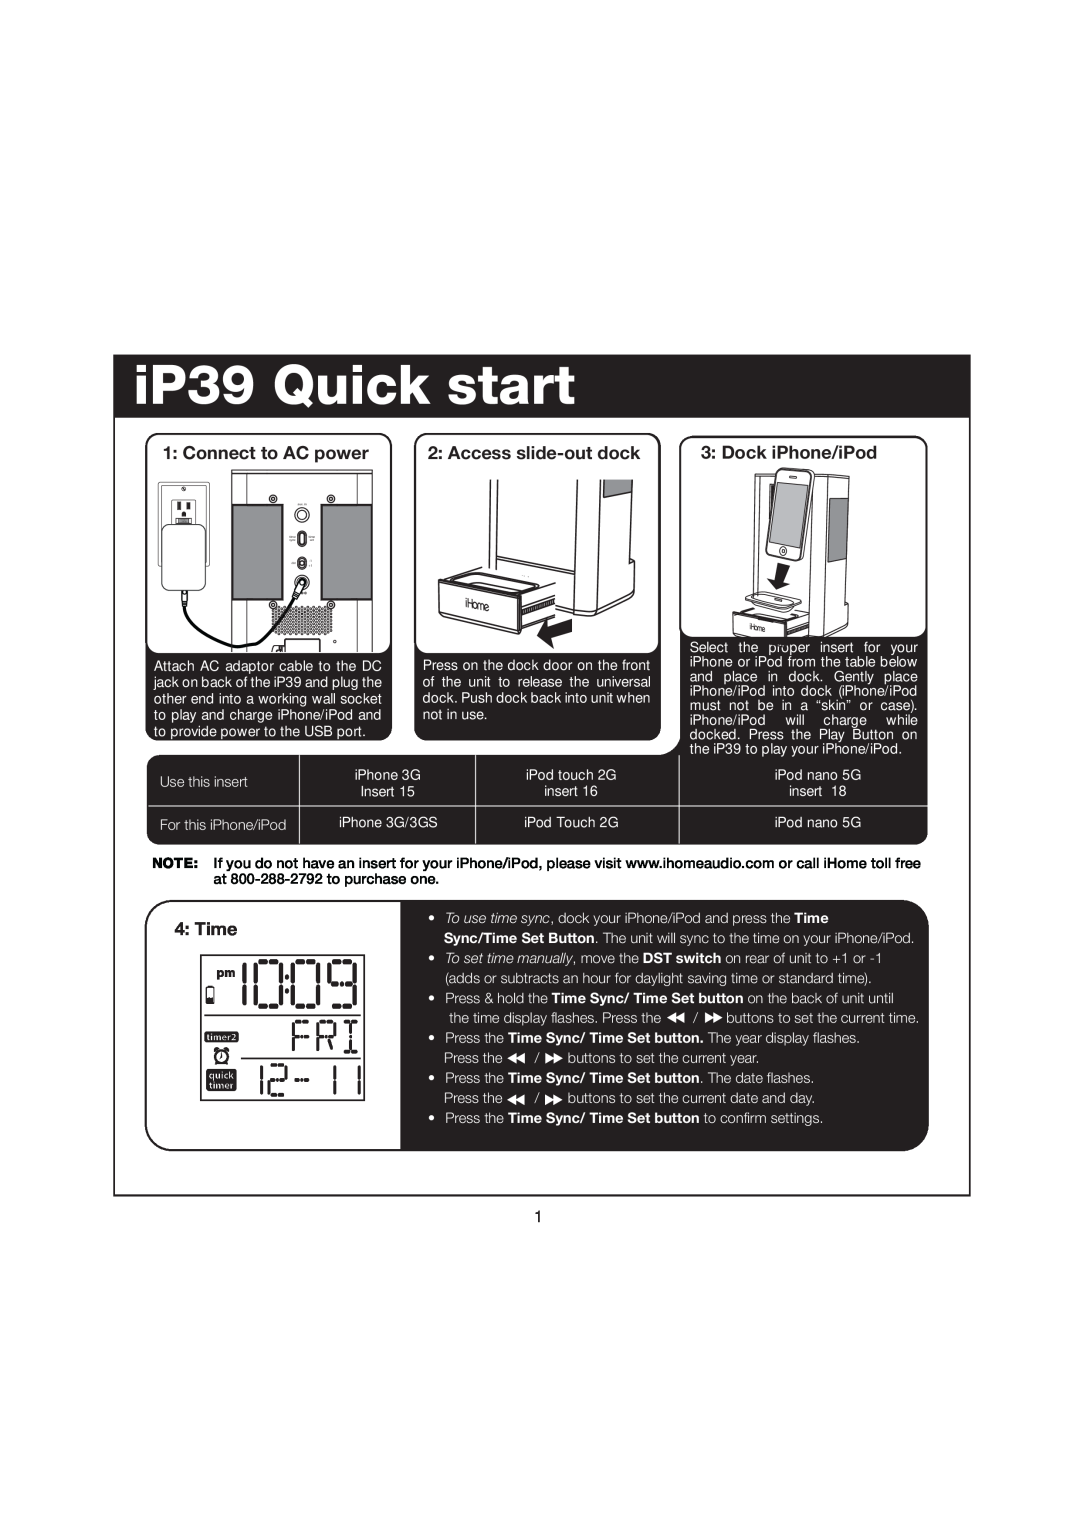 iHome IP39 manual Connect to AC power, Access slide-outdock, Dock iPhone/iPod, Time, iP39 Quick start 